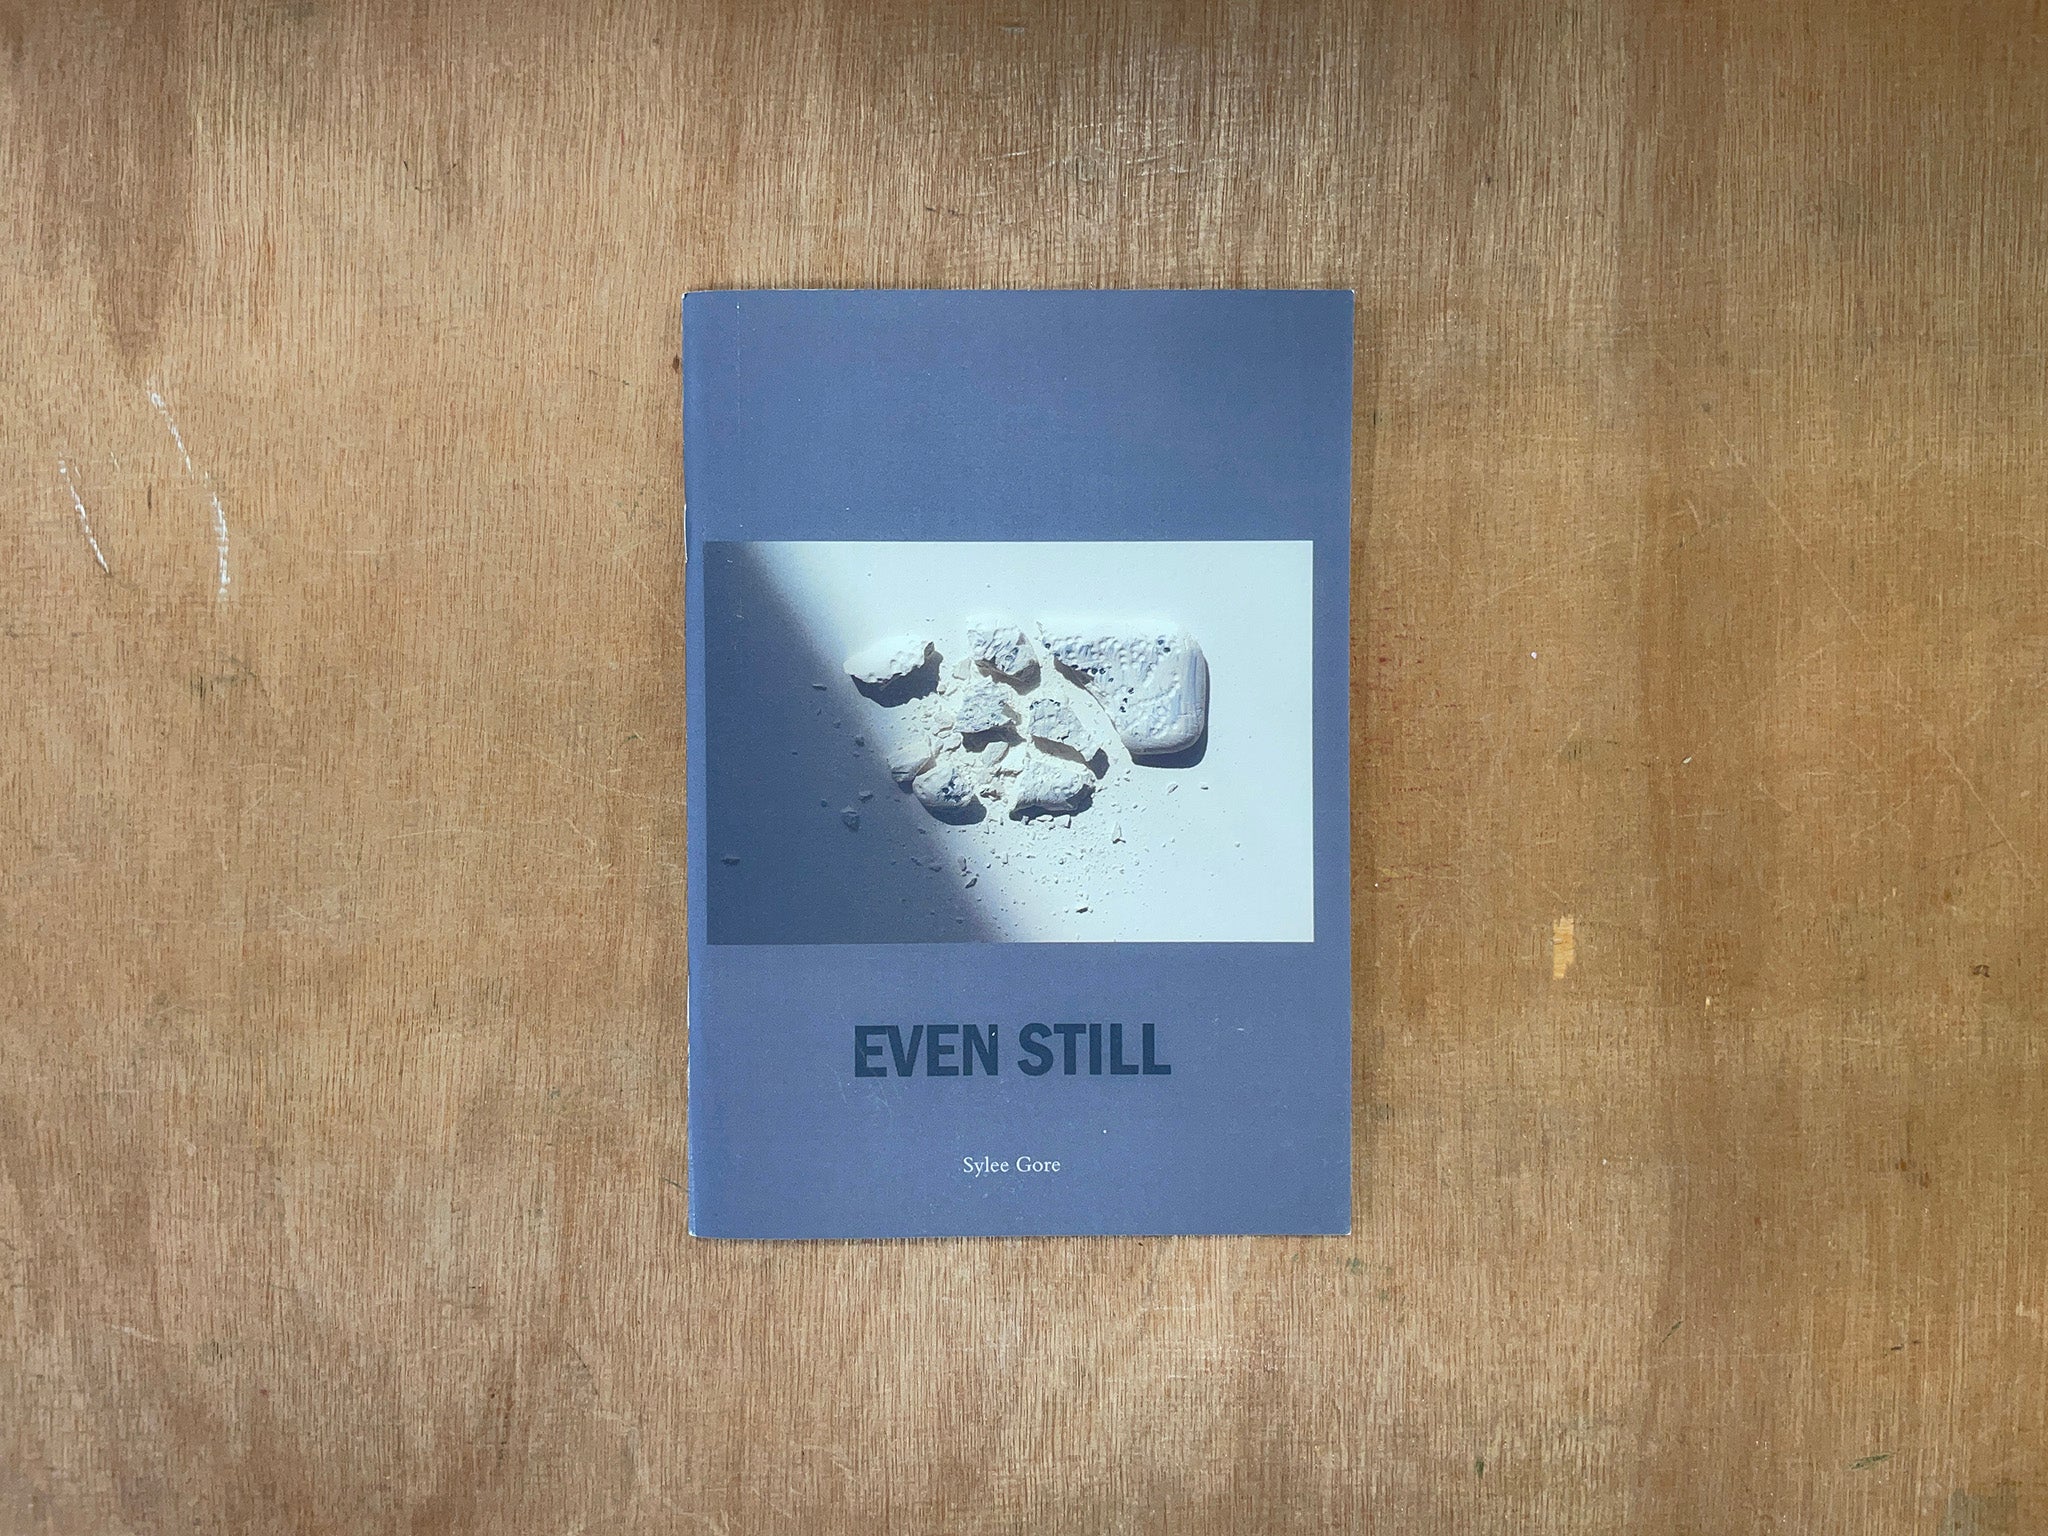 EVEN STILL by Sylee Gore